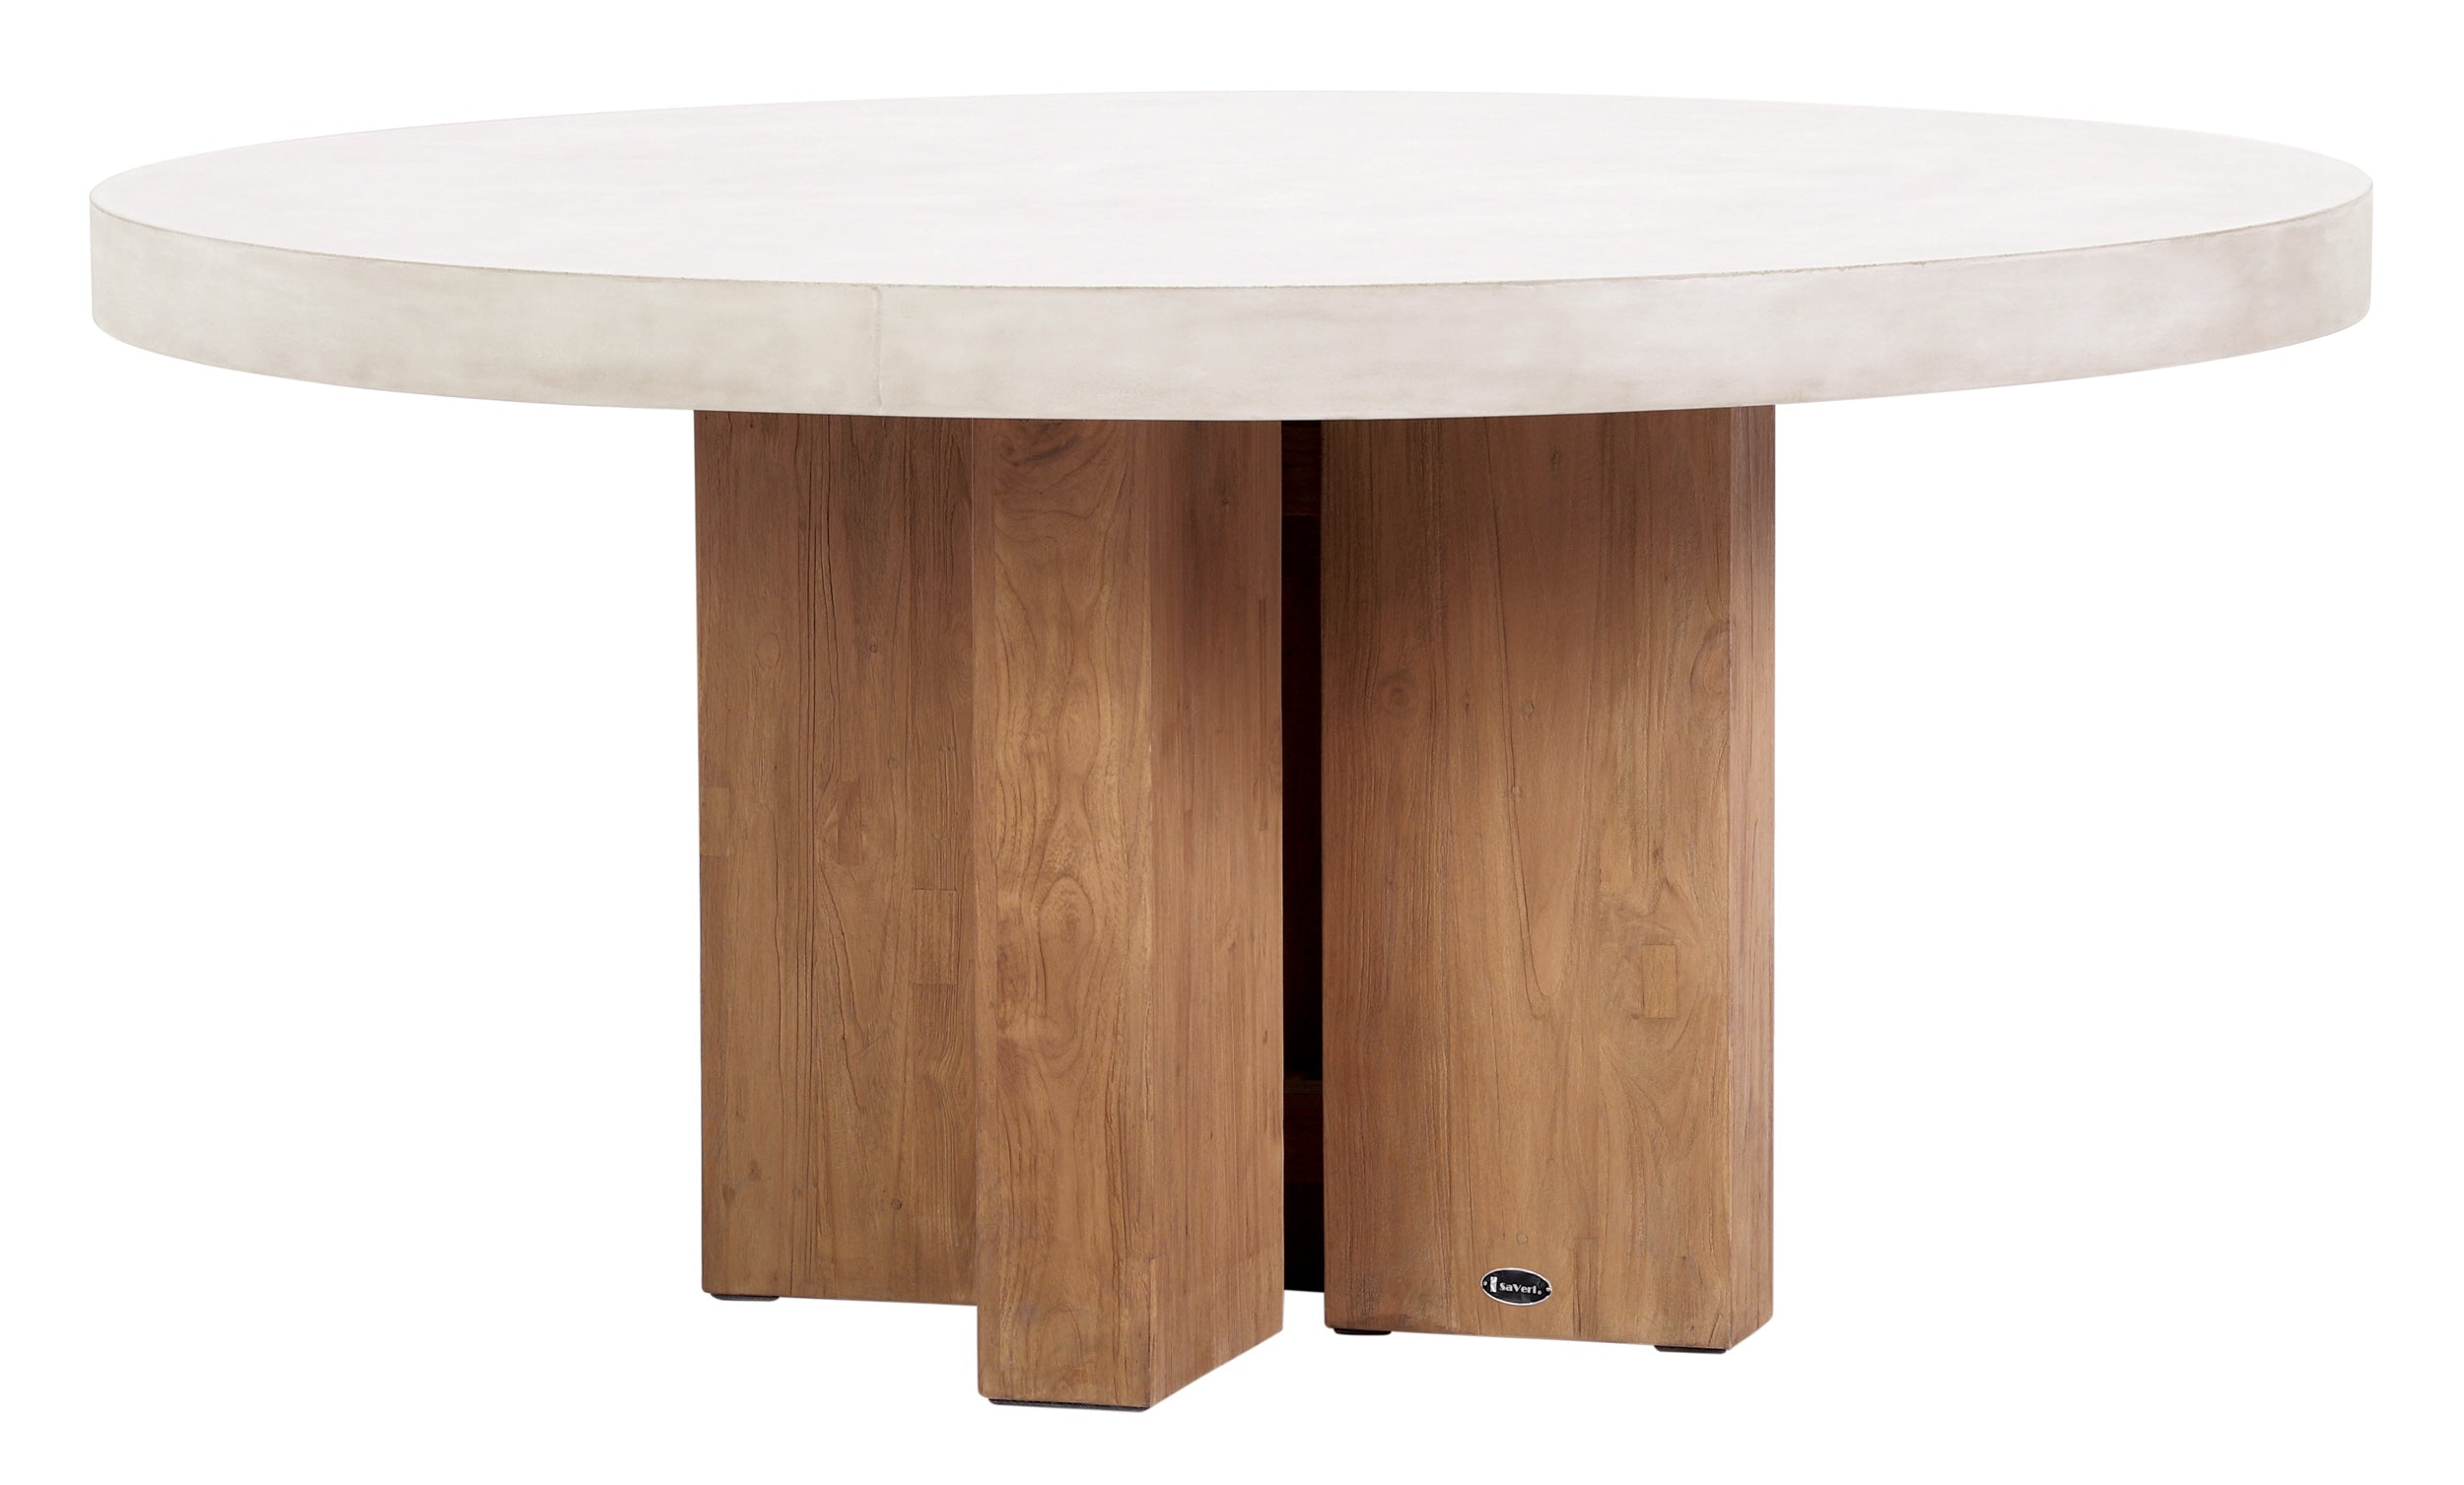 Java Teak and Concrete Dining Table - Ivory White Outdoor Dining Table